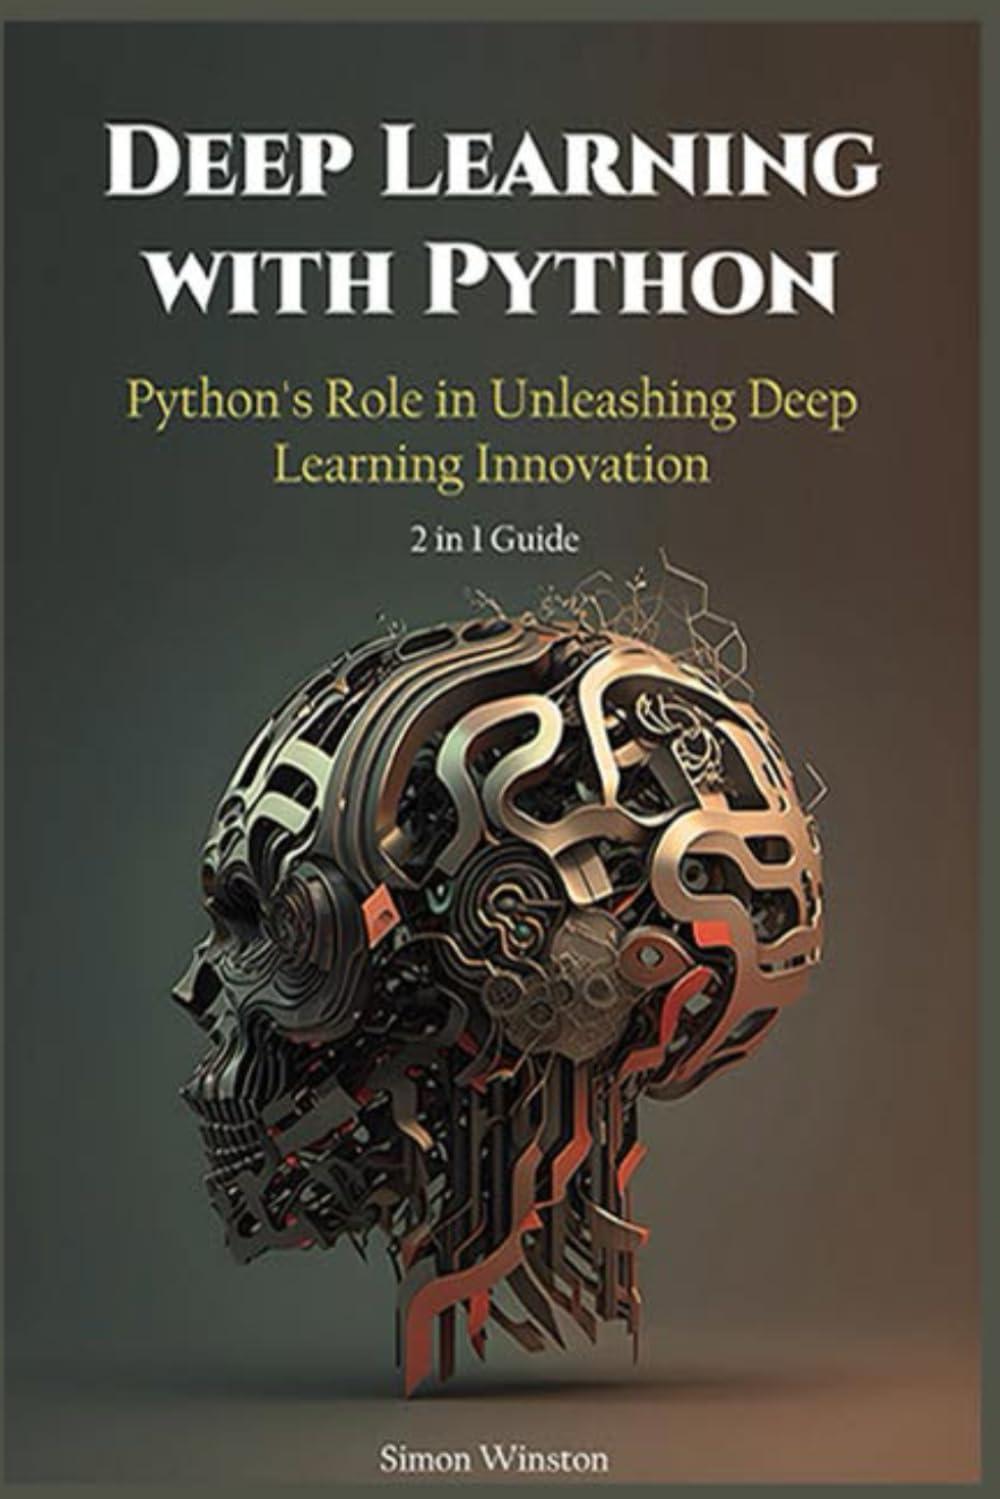 deep learning with python 2 in 1 guide python's role in unleashing deep learning innovation 1st edition simon